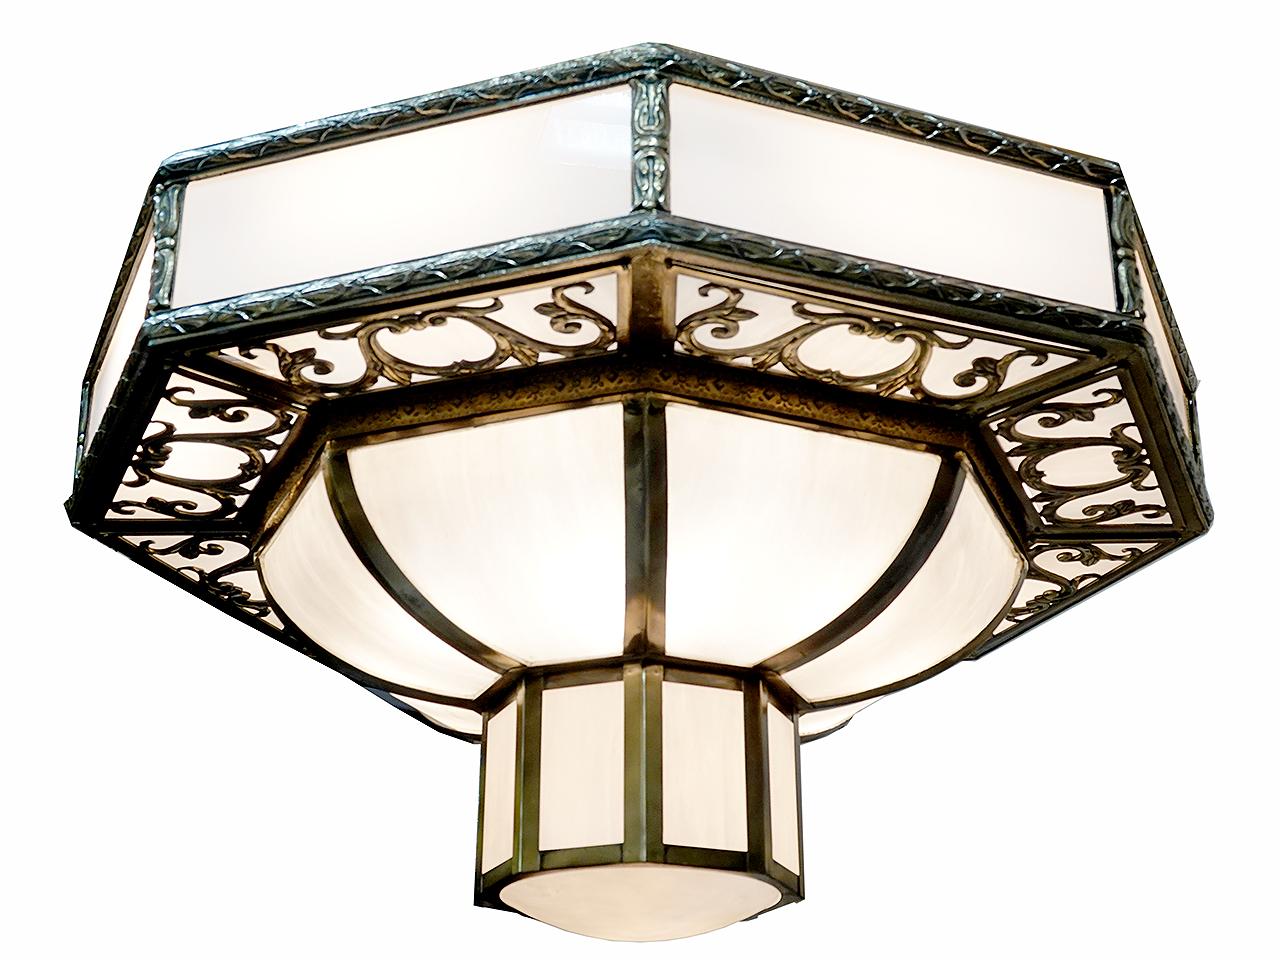 This is a large impressive chandelier that has a four foot diameter. The hight is only three foot which allows for lower ceiling heights. I also like that its design is not a fussy and can work with many design styles. The frame is all bronze with